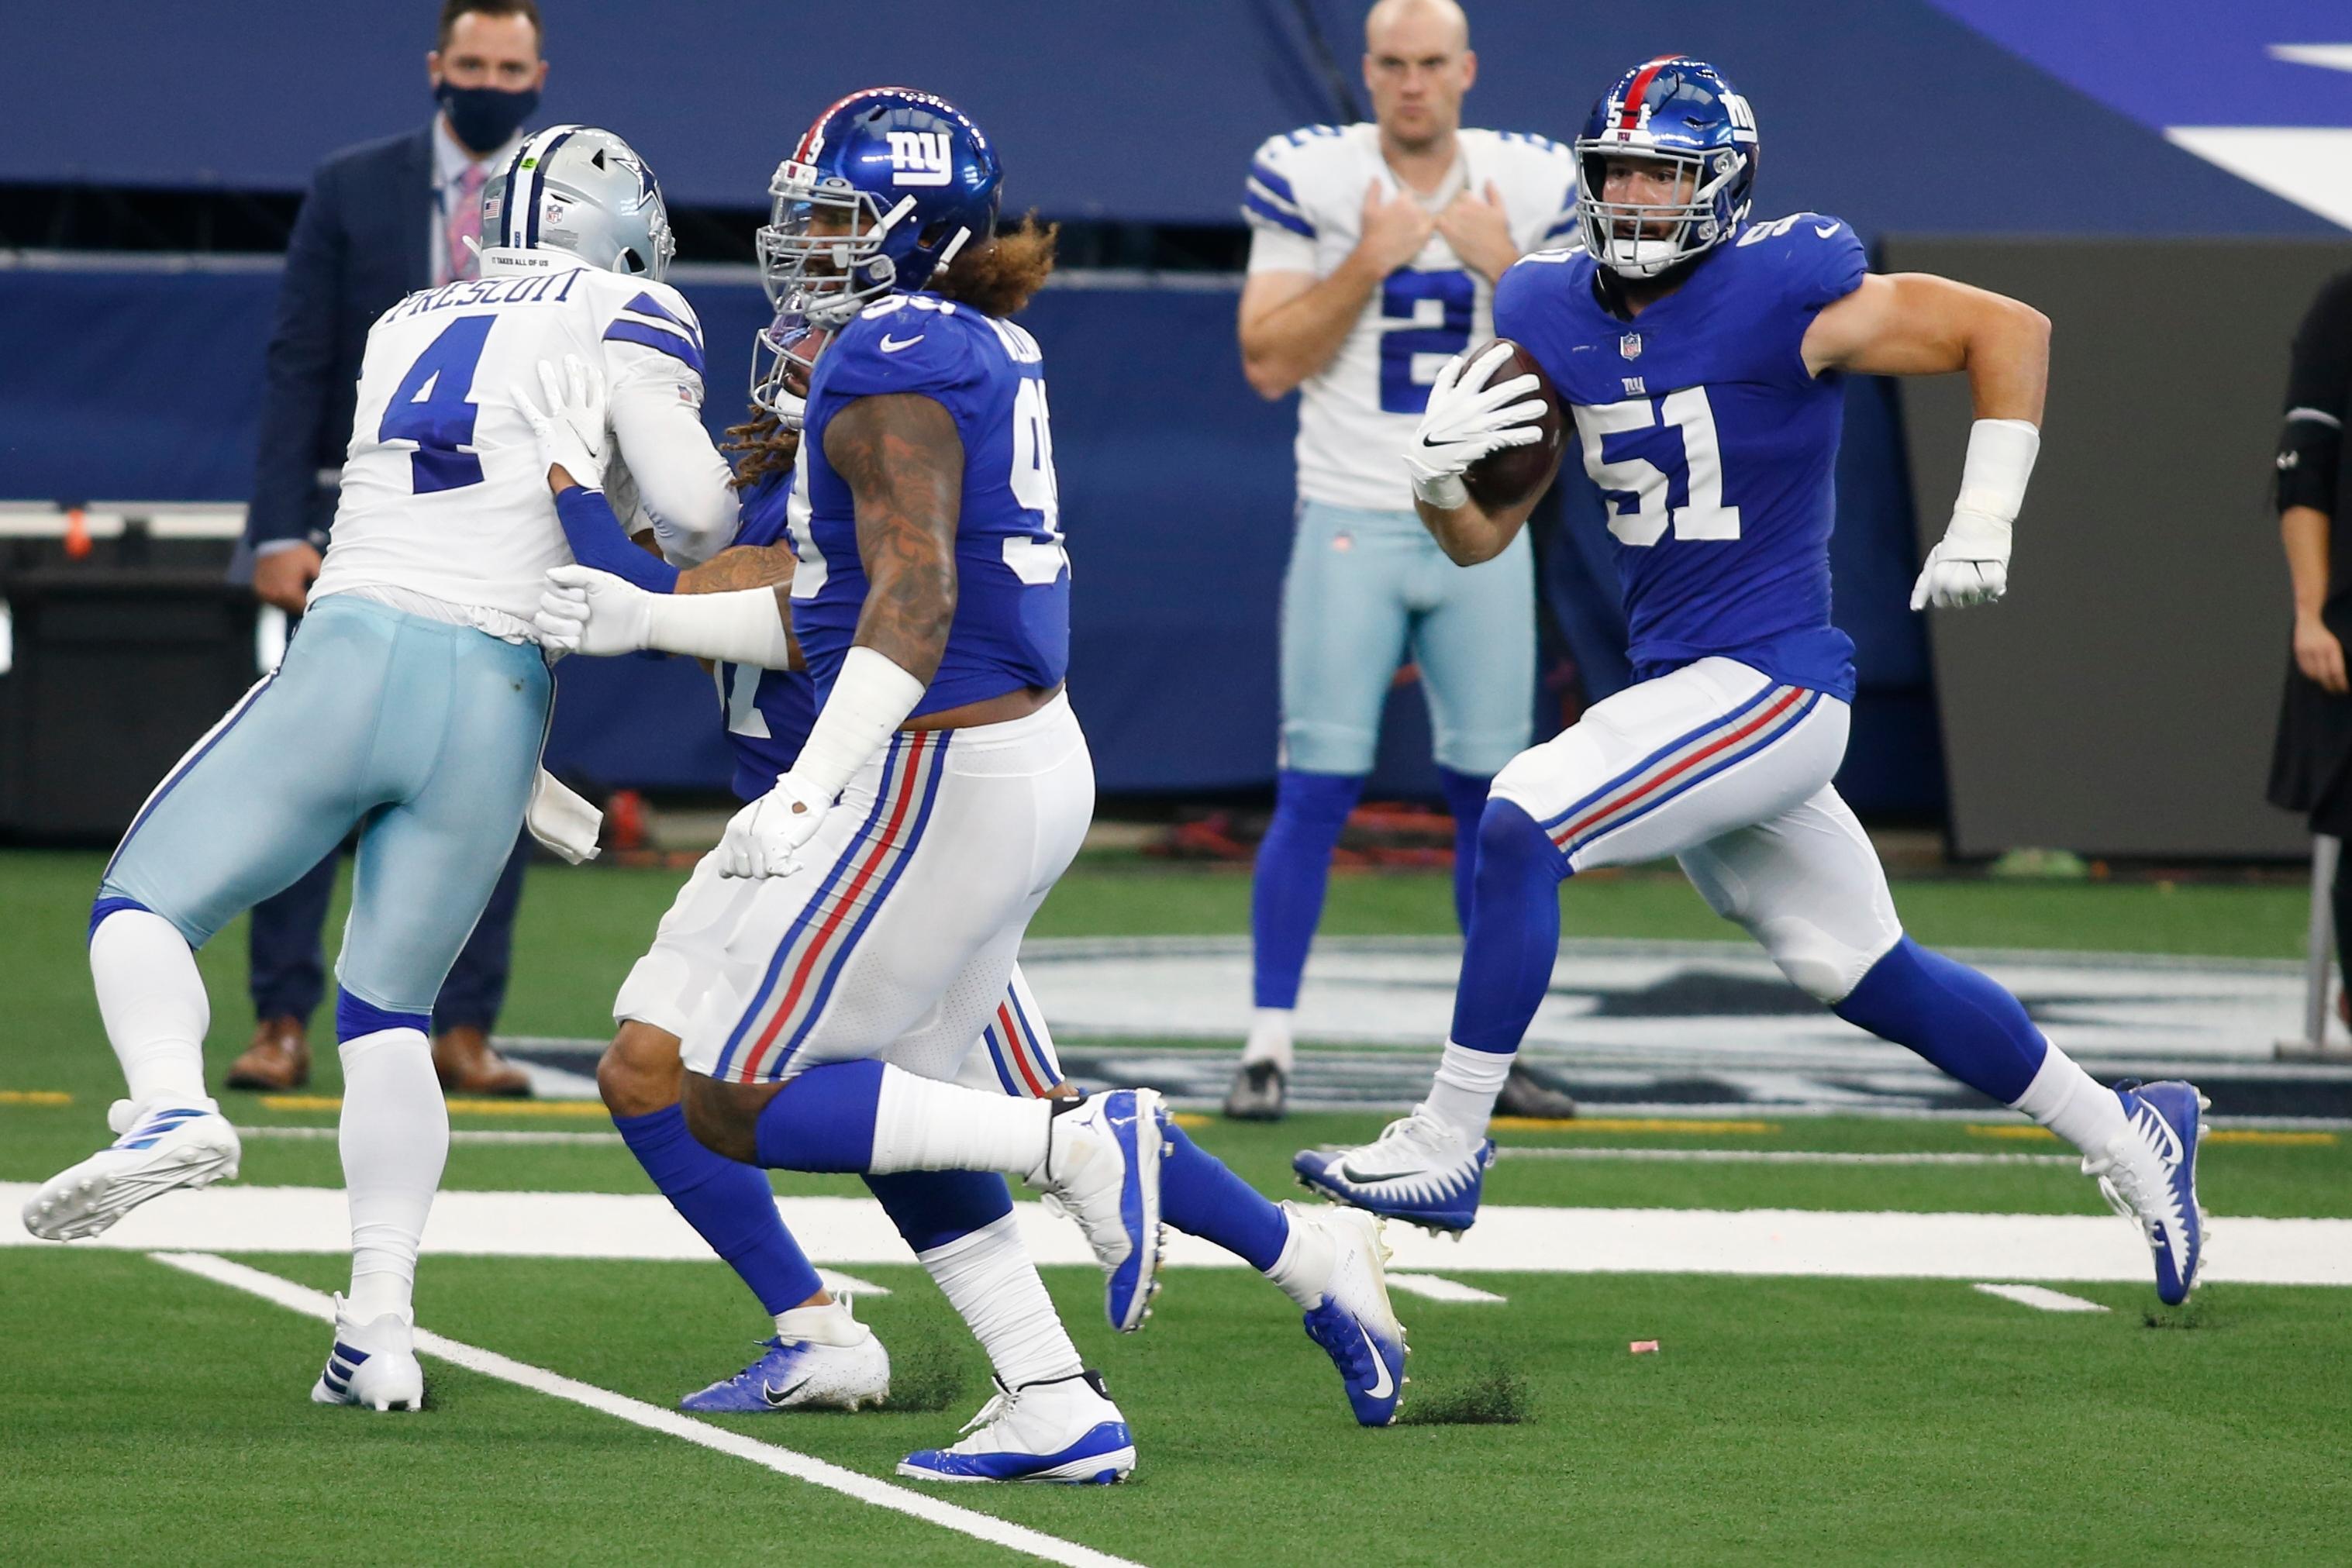 Oct 11, 2020; Arlington, Texas, USA; New York Giants outside linebacker Kyler Fackrell (51)s returns an interception for a touchdown against the Dallas Cowboys in the first quarter at AT&T Stadium / © Tim Heitman-USA TODAY Sports